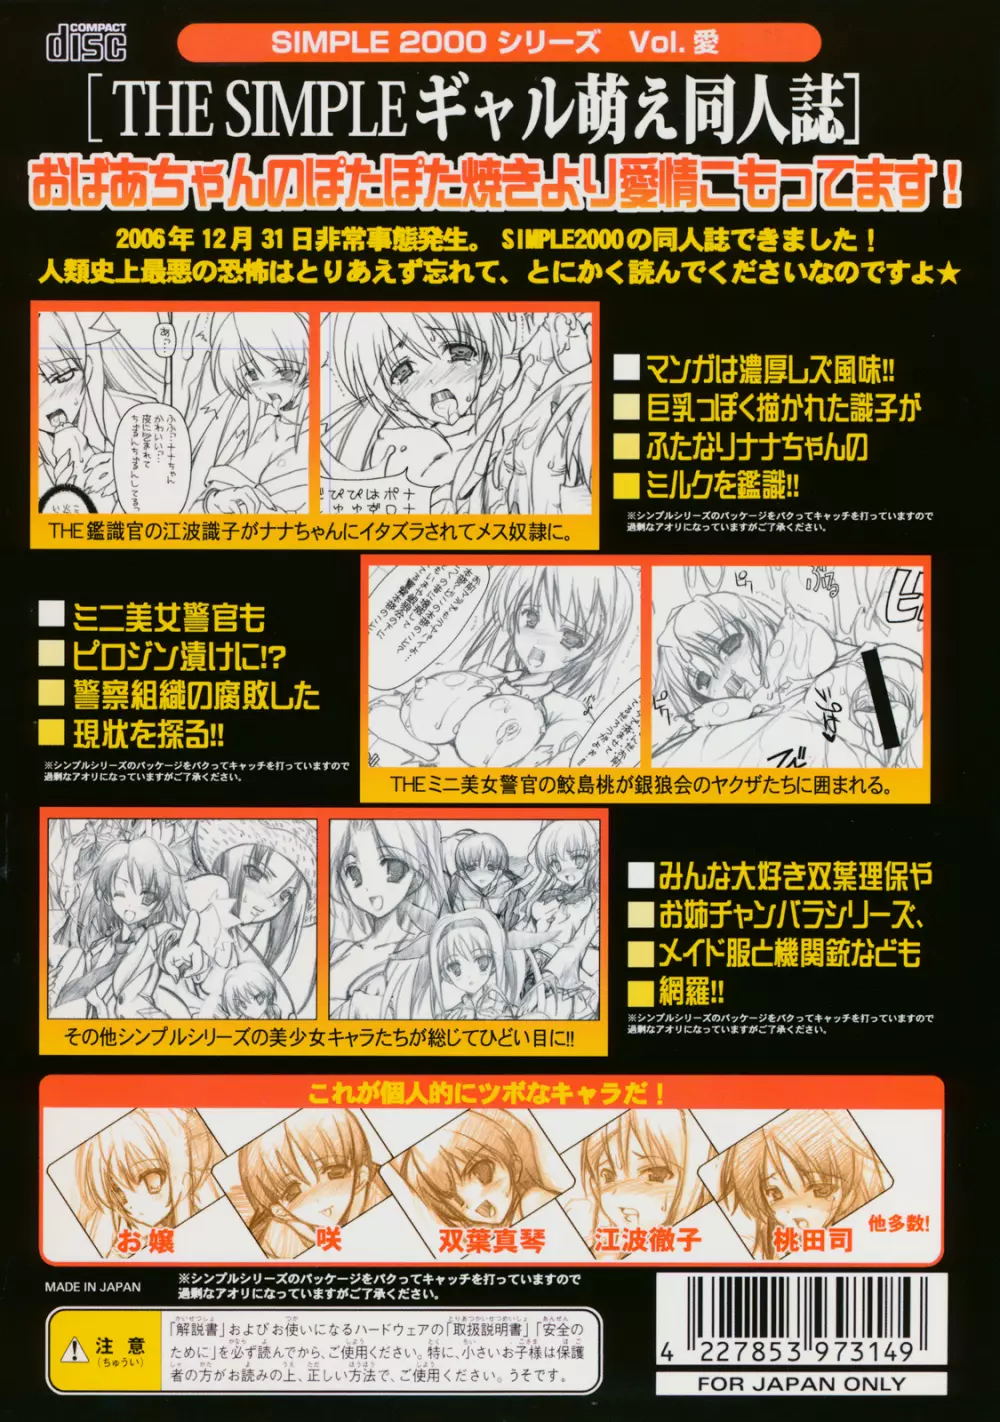 THE SIMPLE ギャル萌え同人誌 Comic Side Page.2